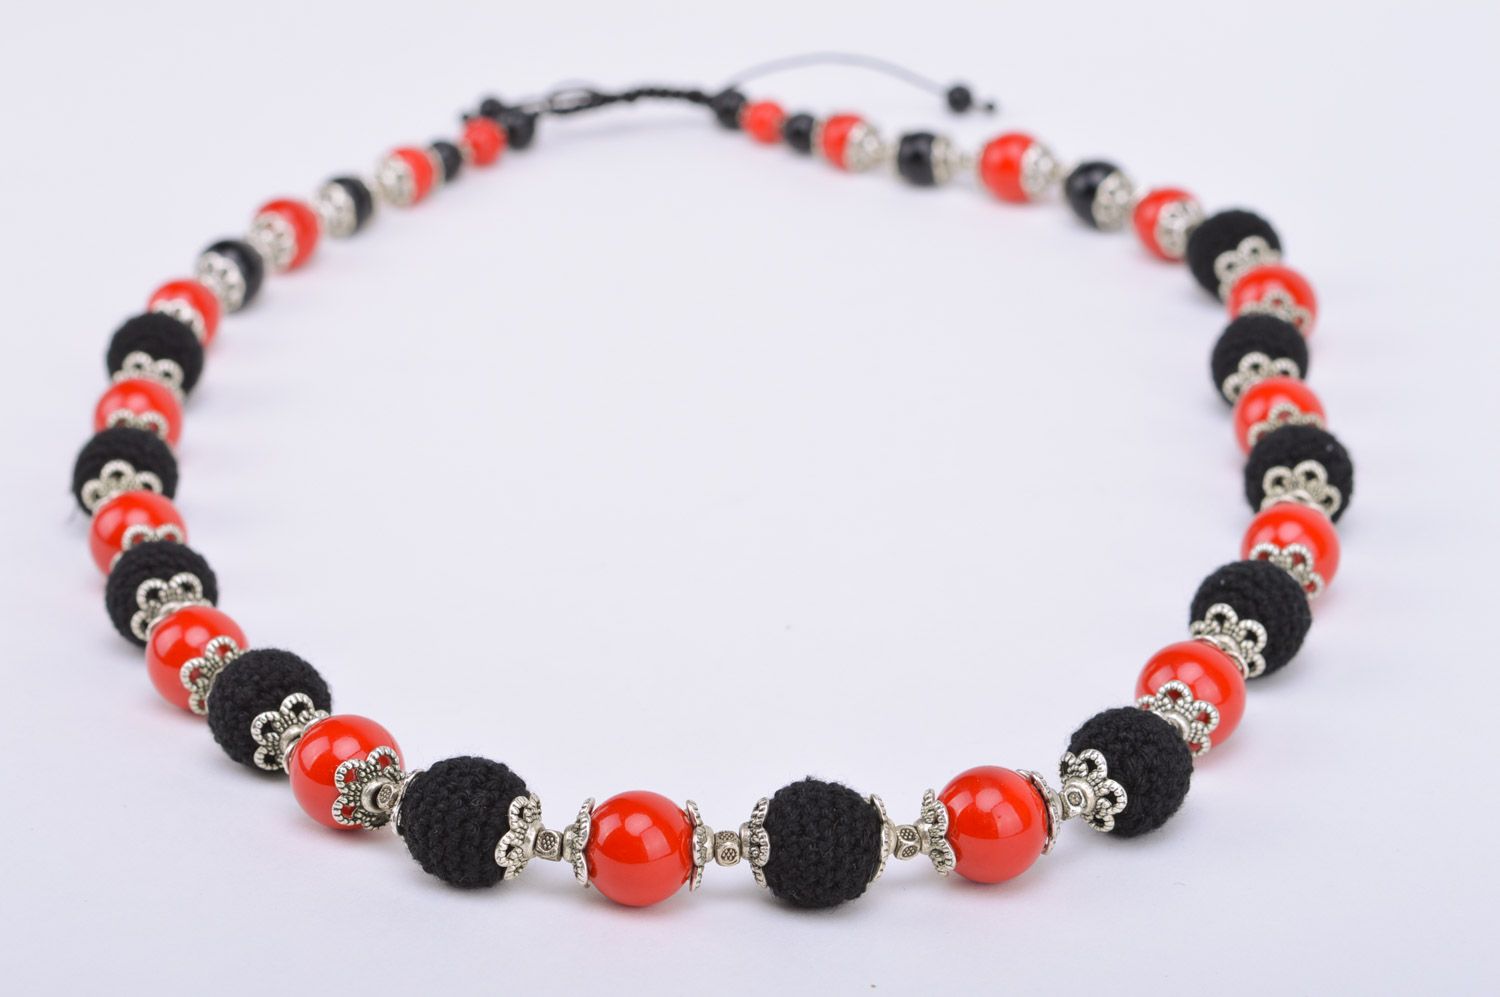 Handmade bright long necklace with crochet over beads of red and black colors photo 2